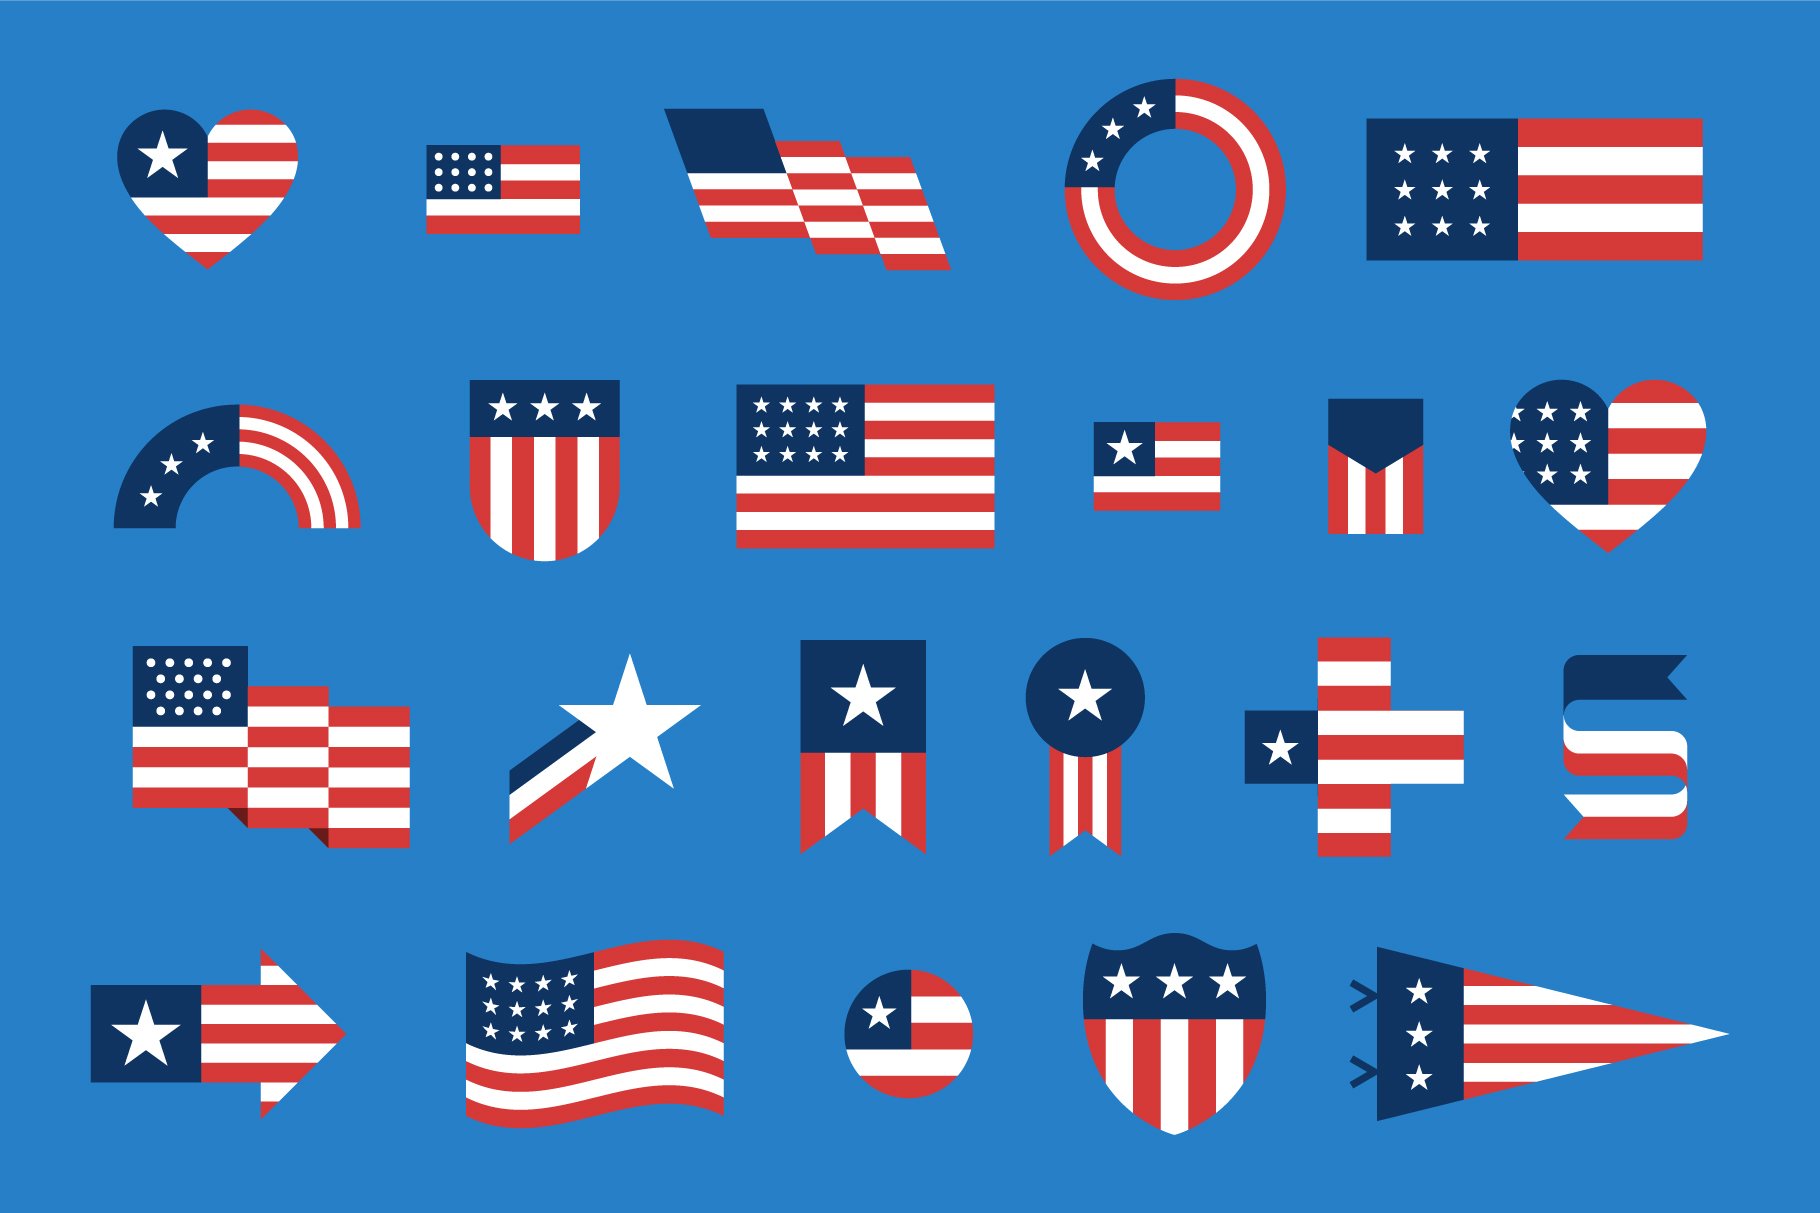 Cool shapes for the USA flags.